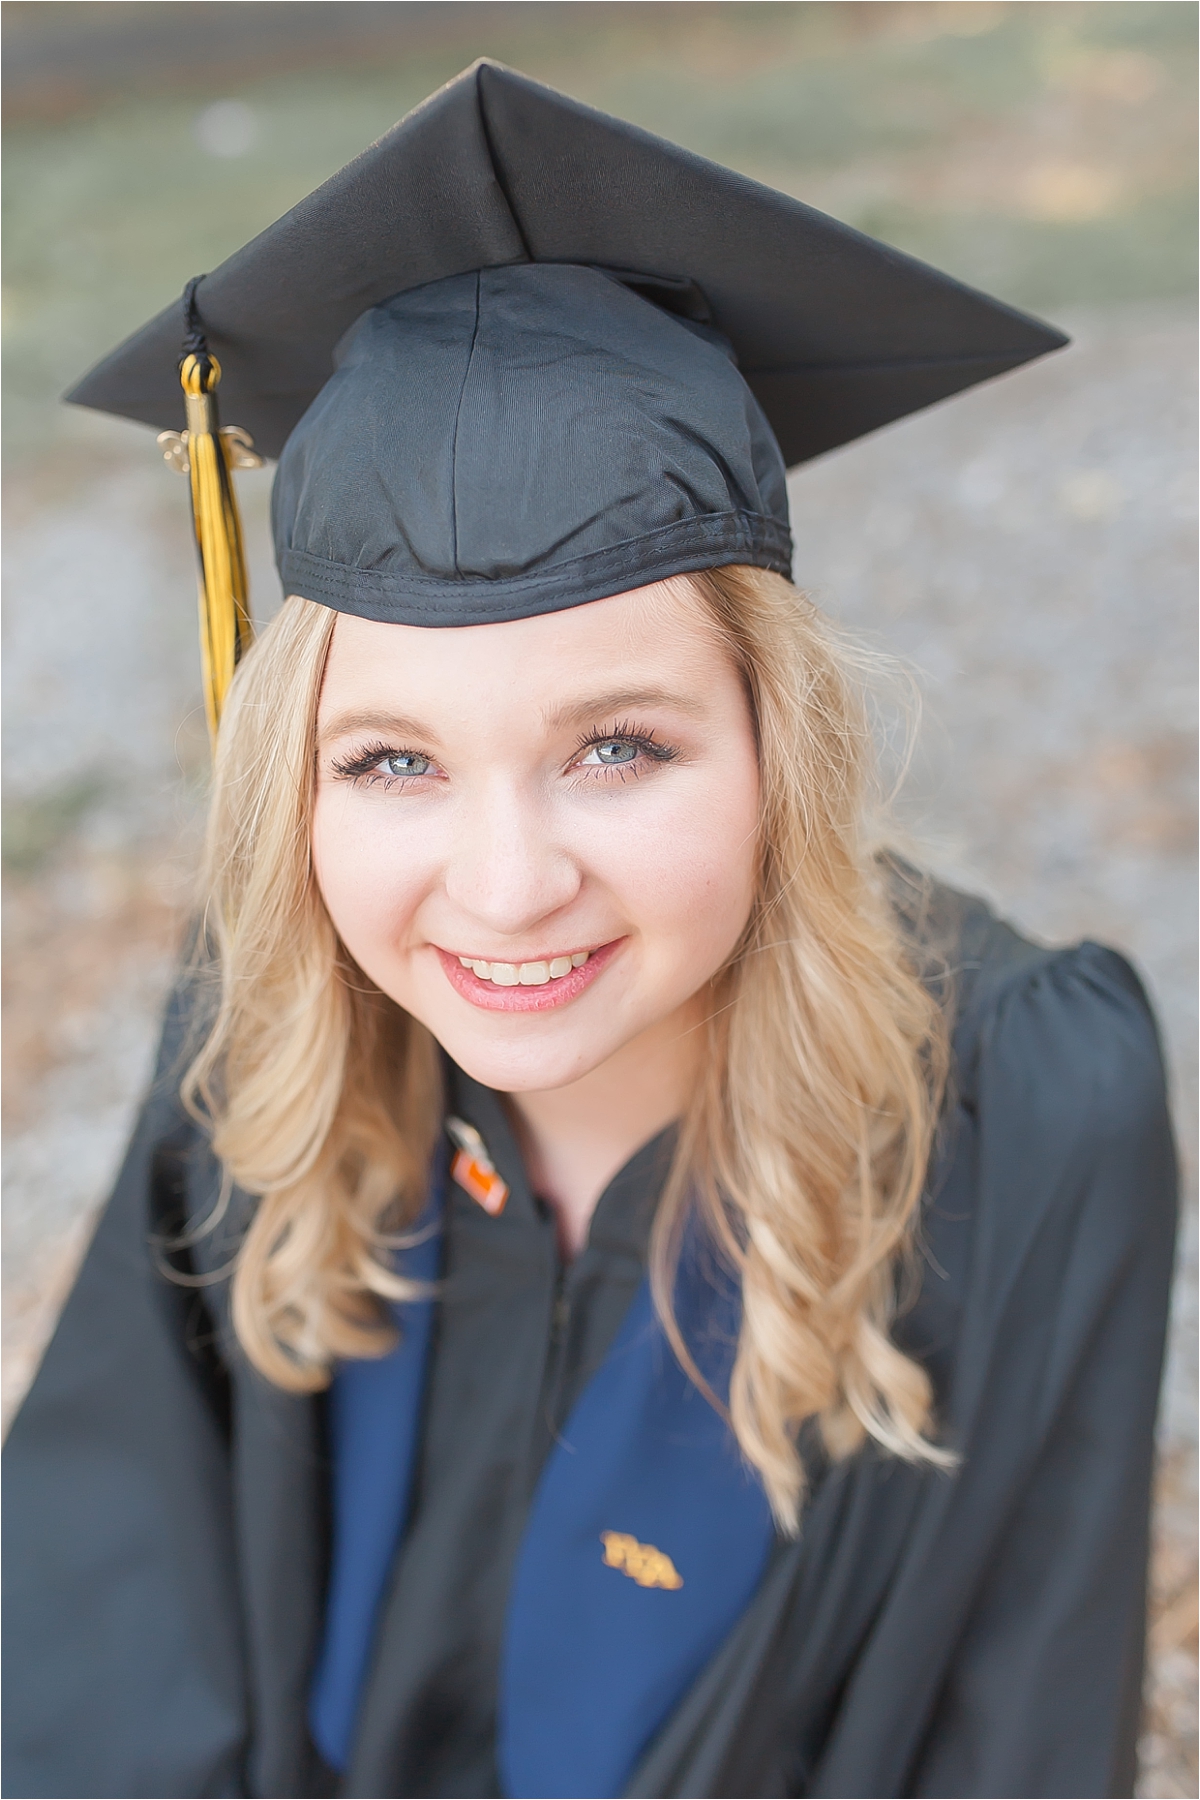 Beautiful senior picture of a graduating senior in her high school graduation cap and gown during her senior portrait photography session